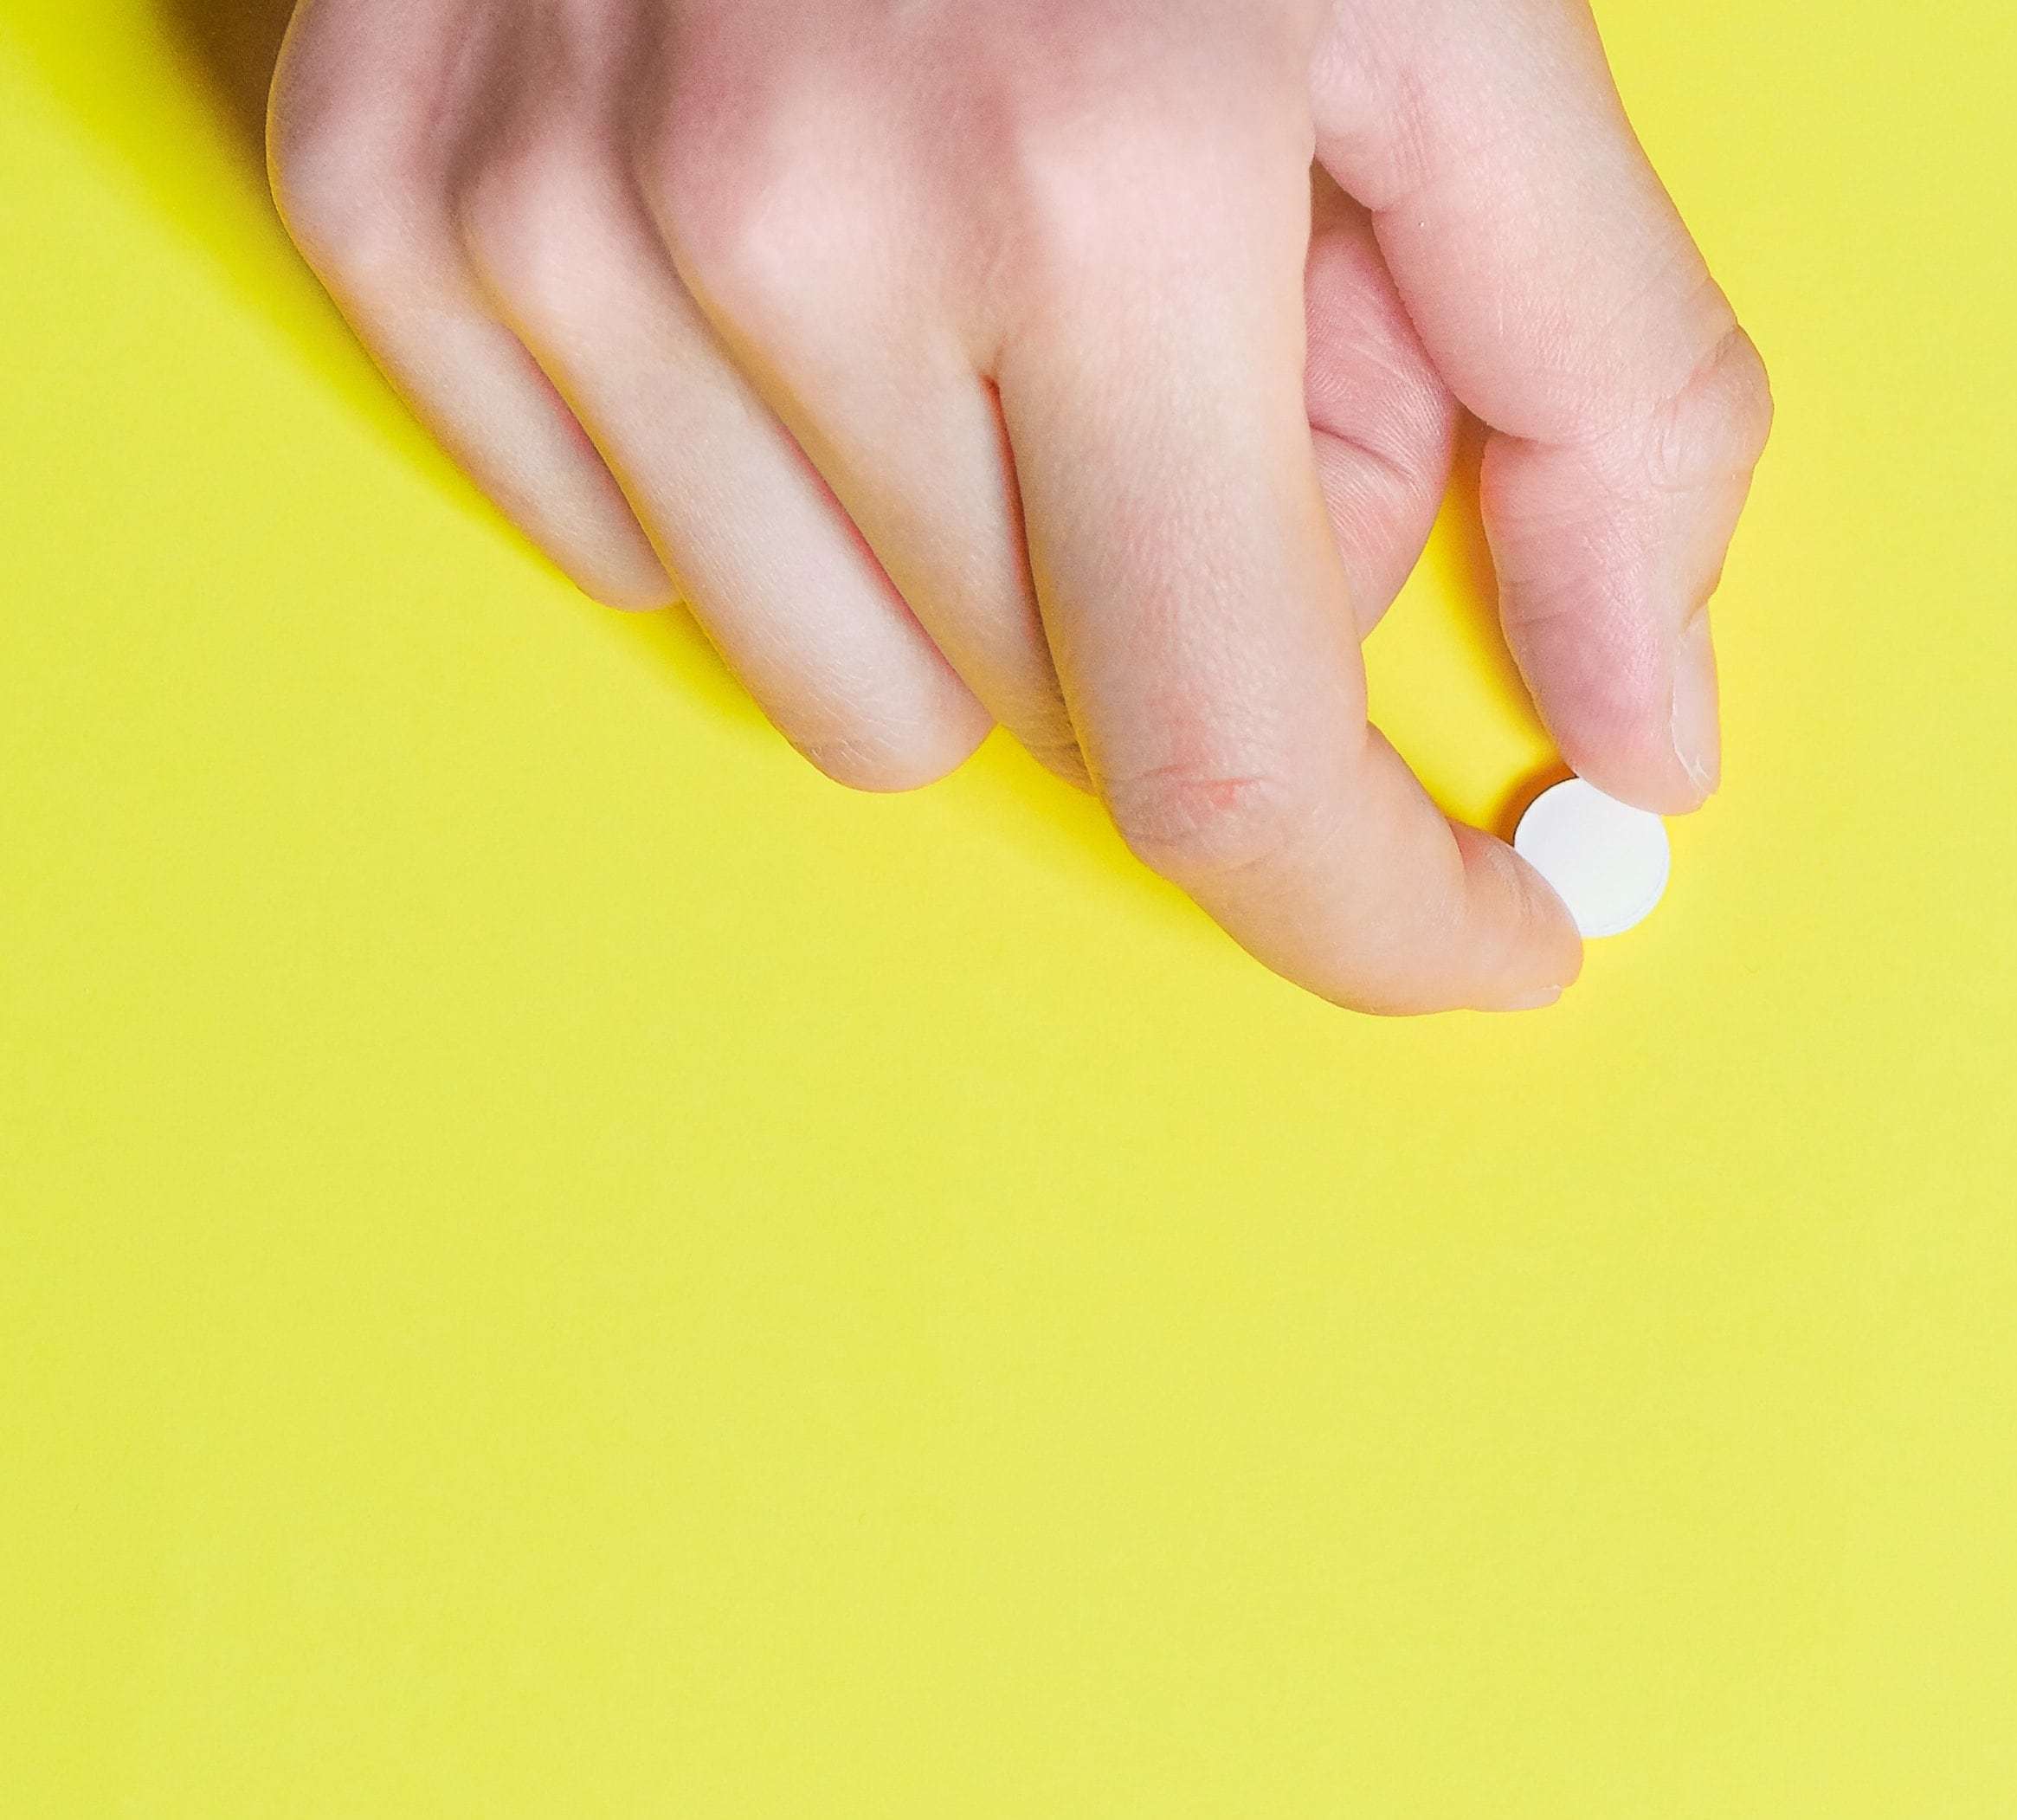 Birth Control for Acne: What You Need to Know